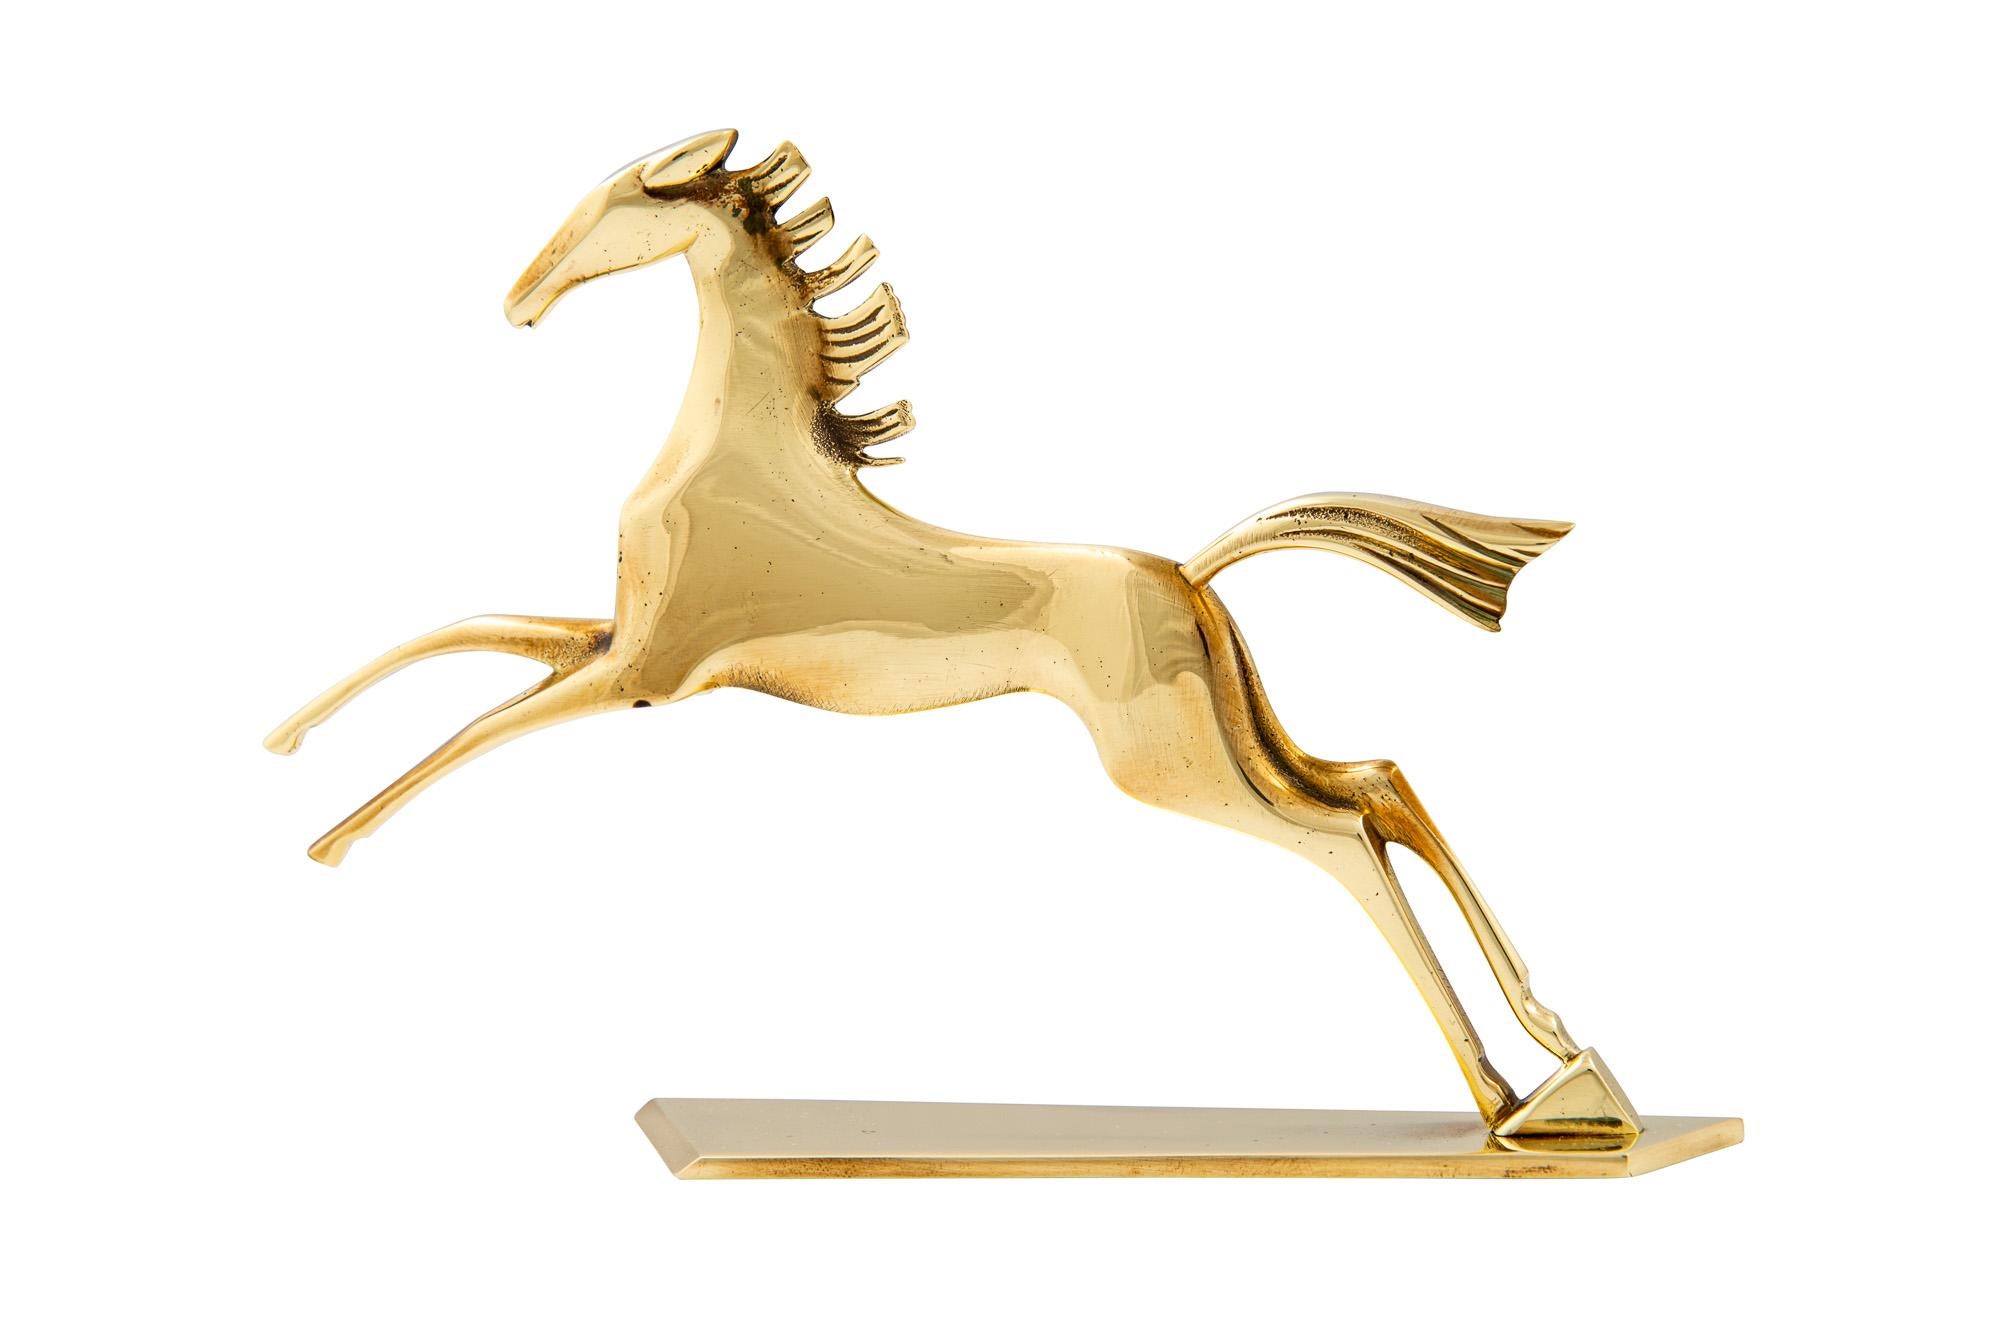 The Horse was a popular theme for the Werkstätte Hagenauer. The freedom and dynamic in the movement of this animal is what many buyers liked. This galloping depiction is especially dynamic with the horse’s mane moving in the wind. The quality of